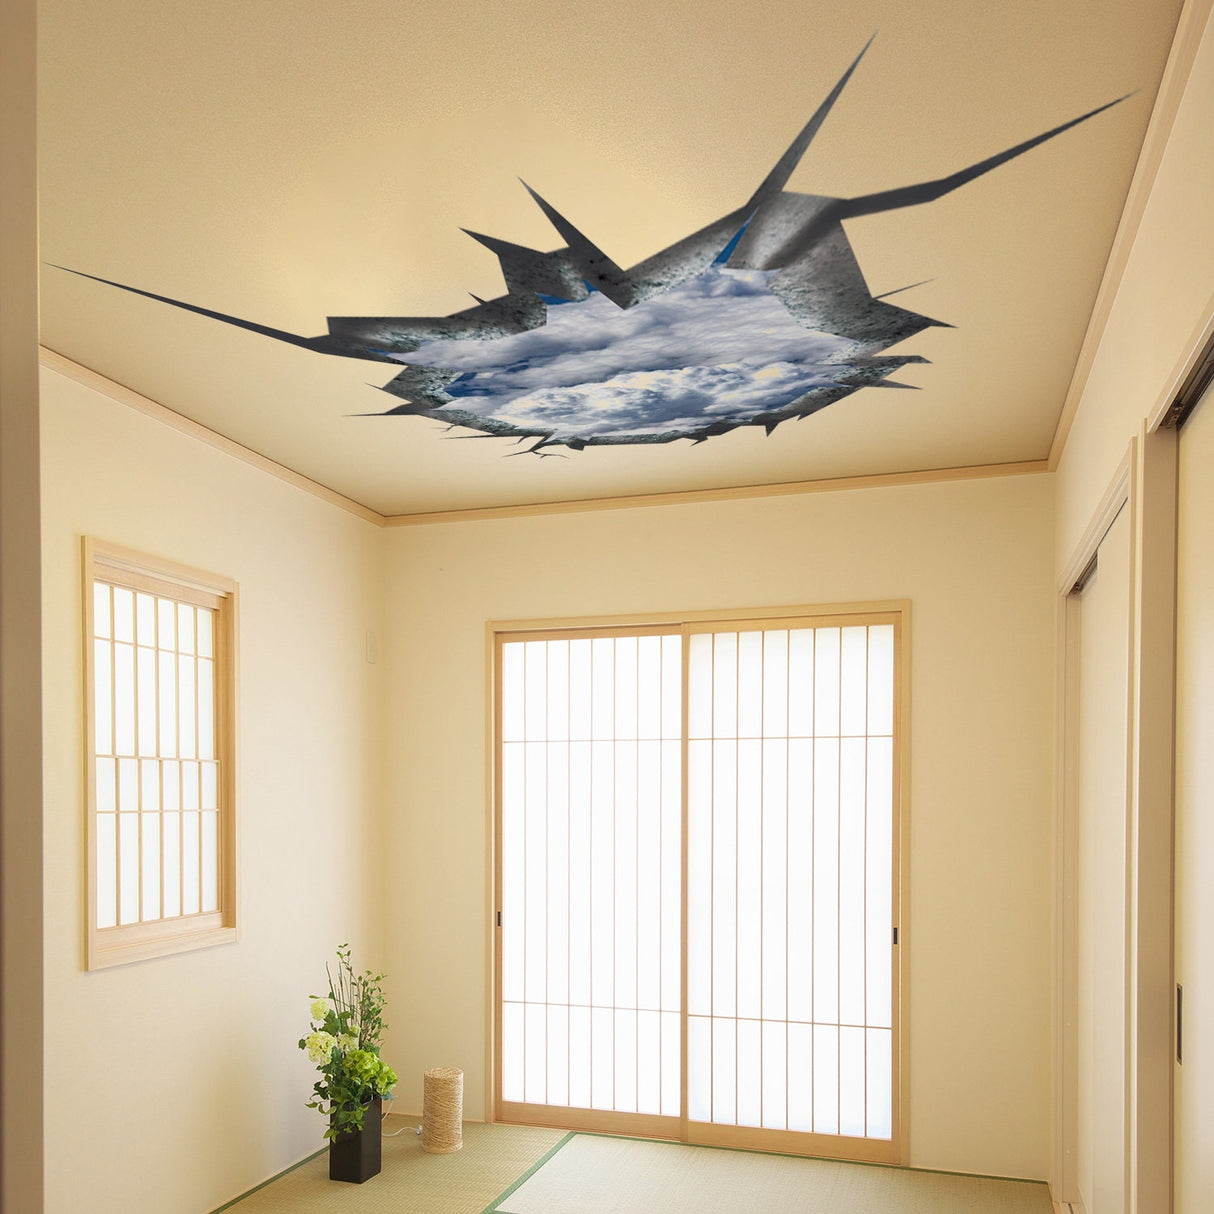 3d Ceiling Sticker - Blue Sky Porthole Decoration Wall Decal For Bedroom